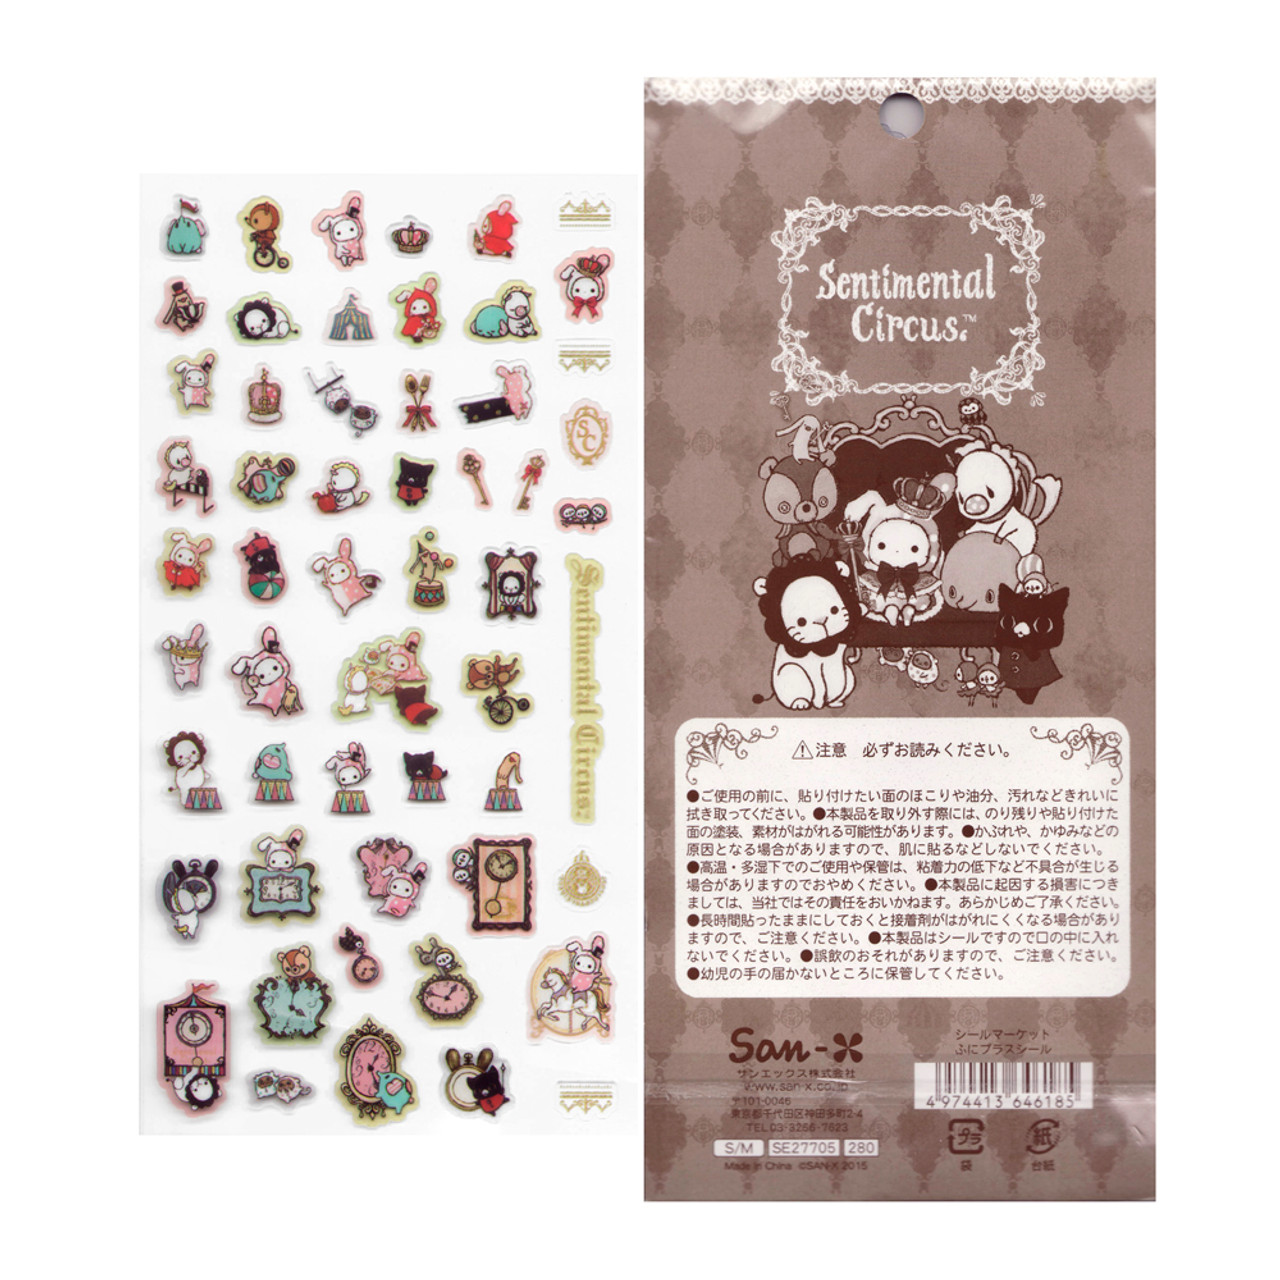 San-x Sentimental Circus Shappo Bunny Little Red Hood Sticker SE27705 ( Back View )